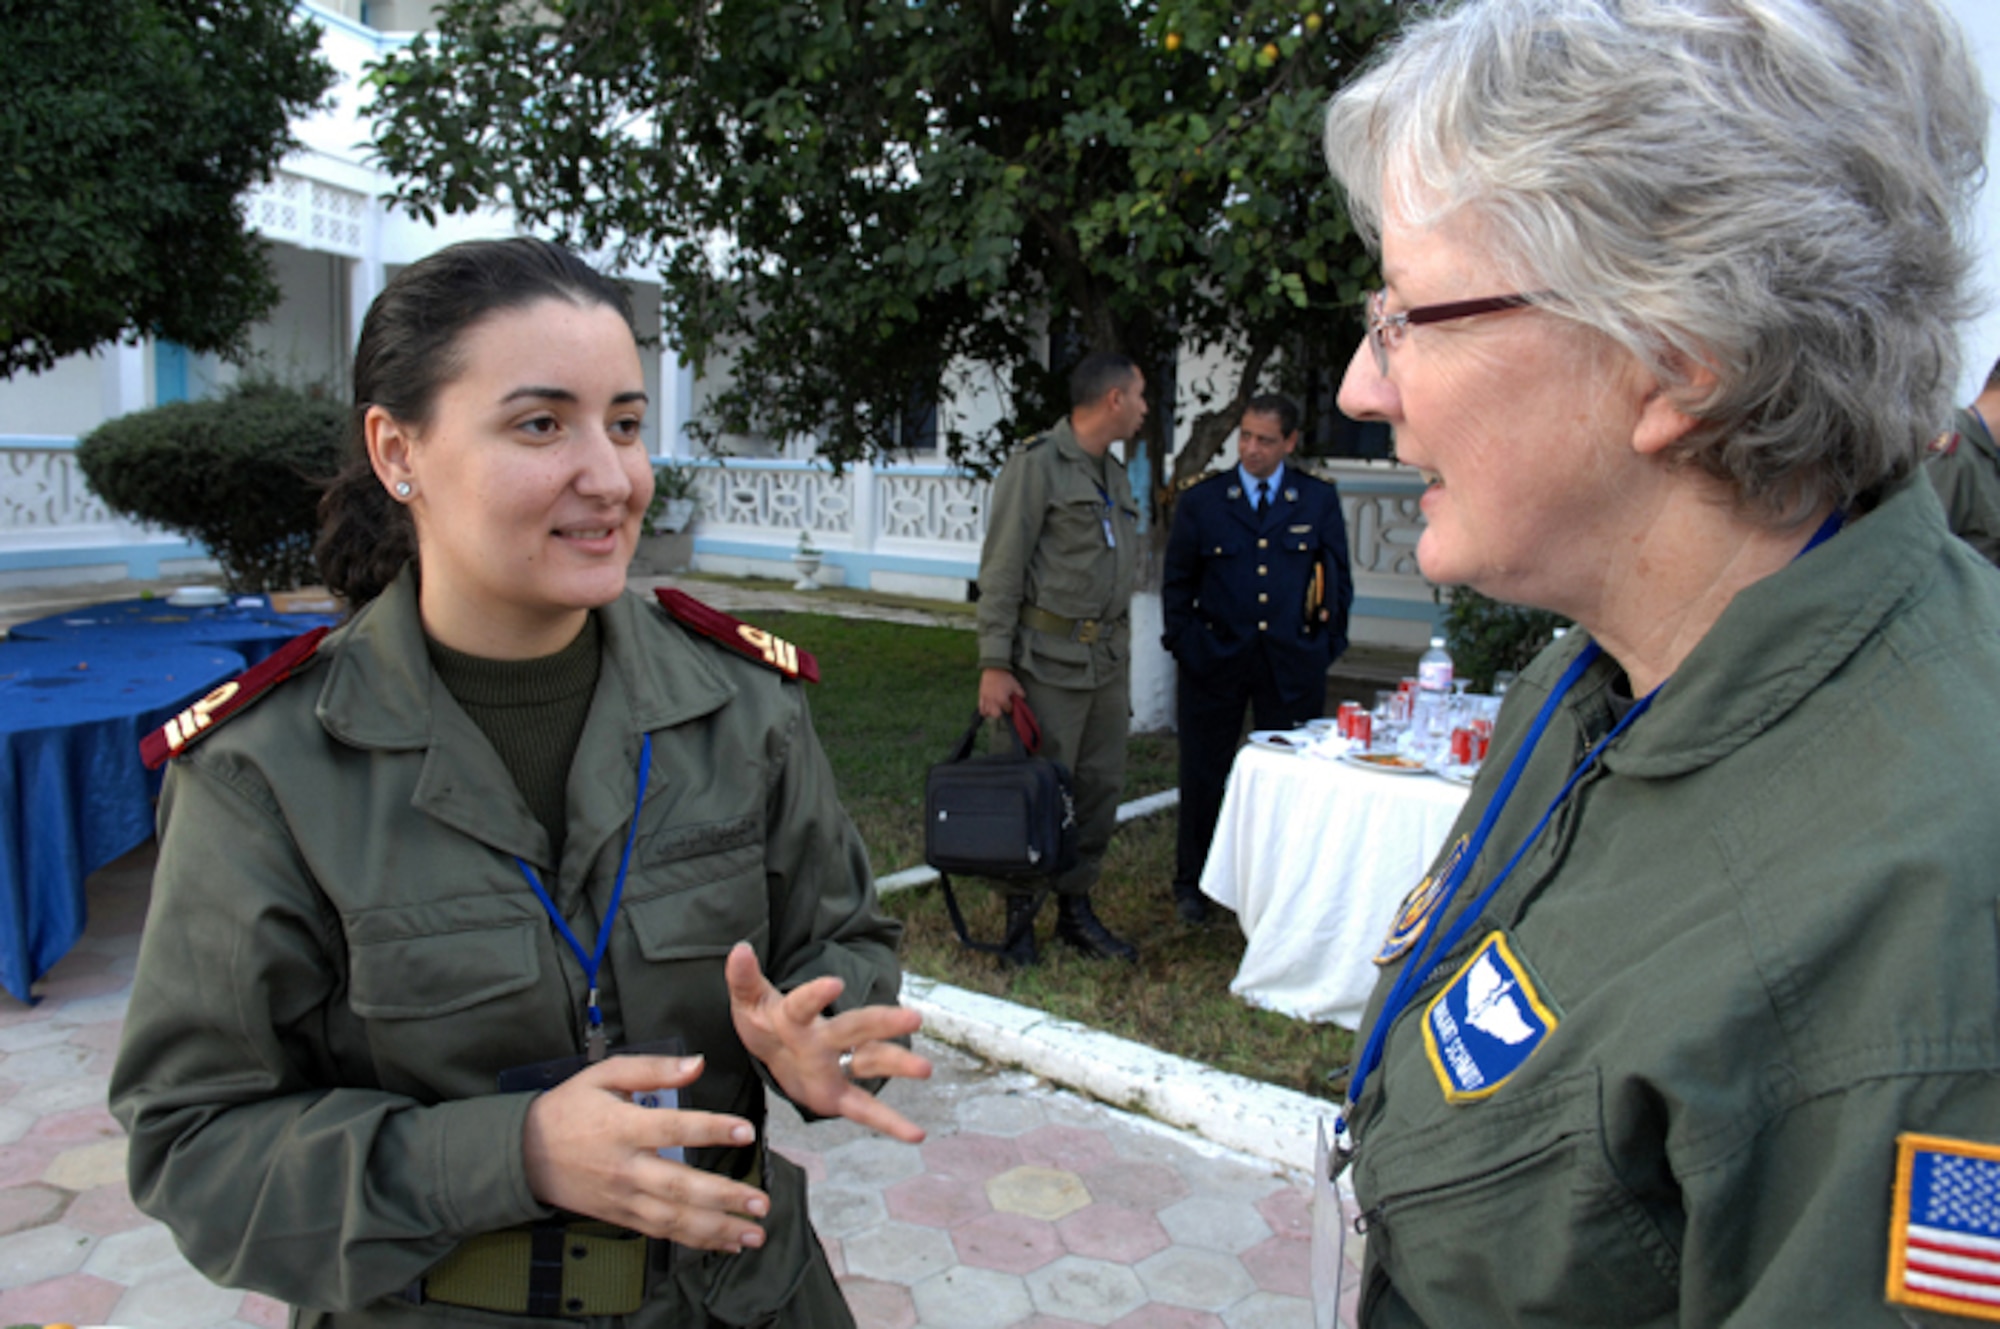 KHARROUBA AIR BASE, Tunisia -- U.S. Air Force Lt. Col. Margaret Schmidt, (right) Chief Nurse from the 459th Aeromedical Evacuation Squadron, Andrews Air Force Base, Md., discusses American customs with Tunisian Navy Hematologist Capt. Imen Mzougui at Kharrouba Air Base, Tunisia, during Medlite 2008.  Medlite is a Joint Chiefs of Staff Exercise designed to provide and exchange medical skills, techniques and procedures between members of the U.S. Air Force, U.S. Army and Tunisian Military Health Services. (U.S. Air Force photo by Senior Airman Erica Knight)